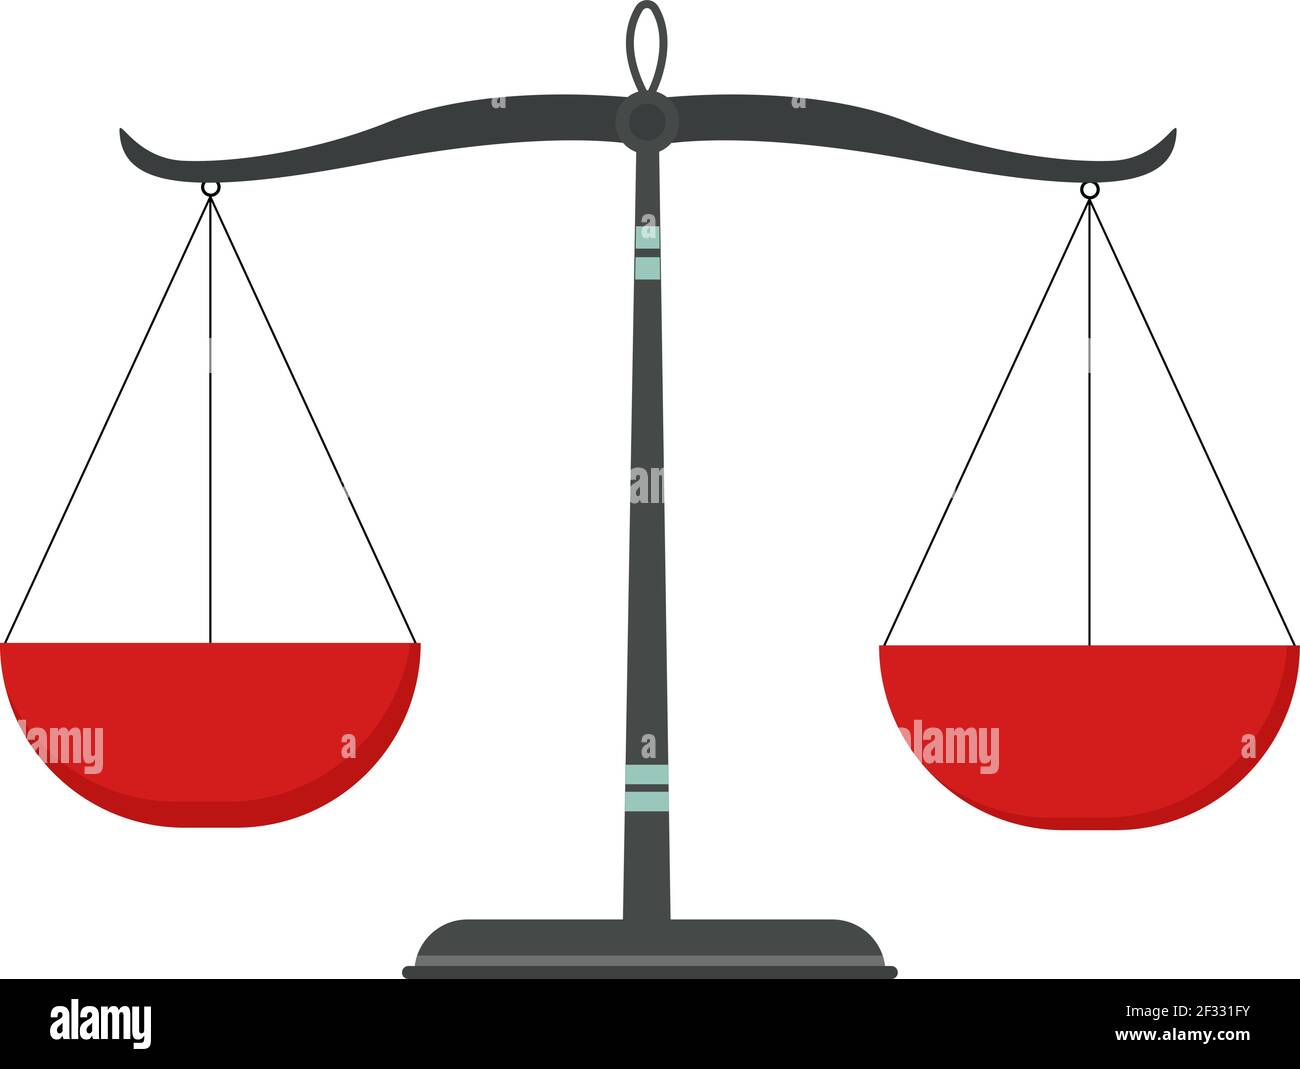 https://c8.alamy.com/comp/2F331FY/weighing-scale-illustration-vector-on-white-background-2F331FY.jpg